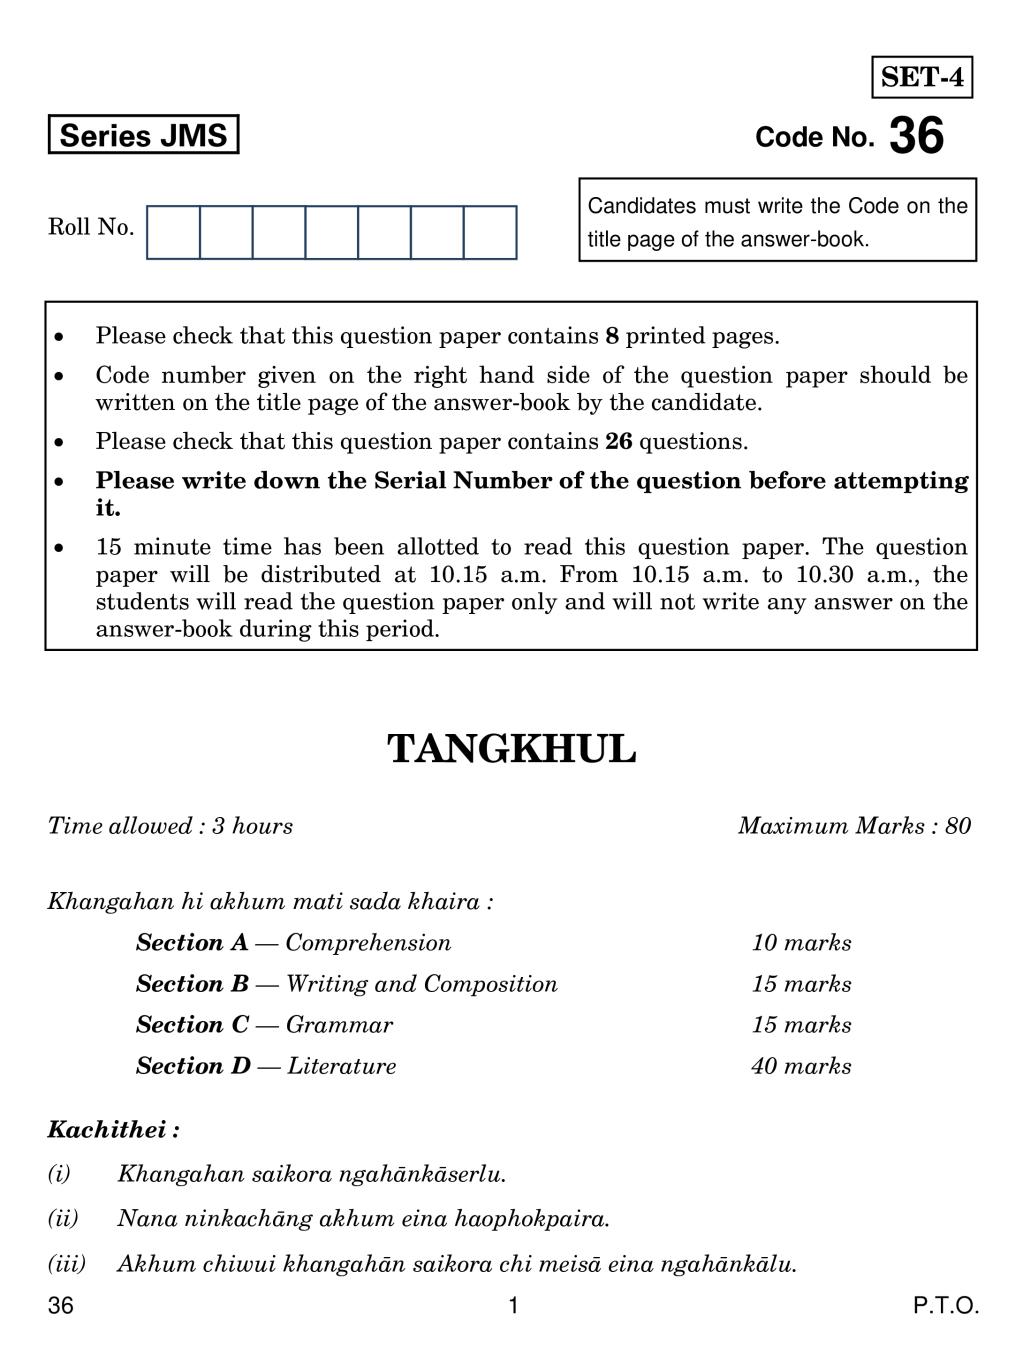 CBSE Class 10 Tangkhul Question Paper 2019 - Page 1